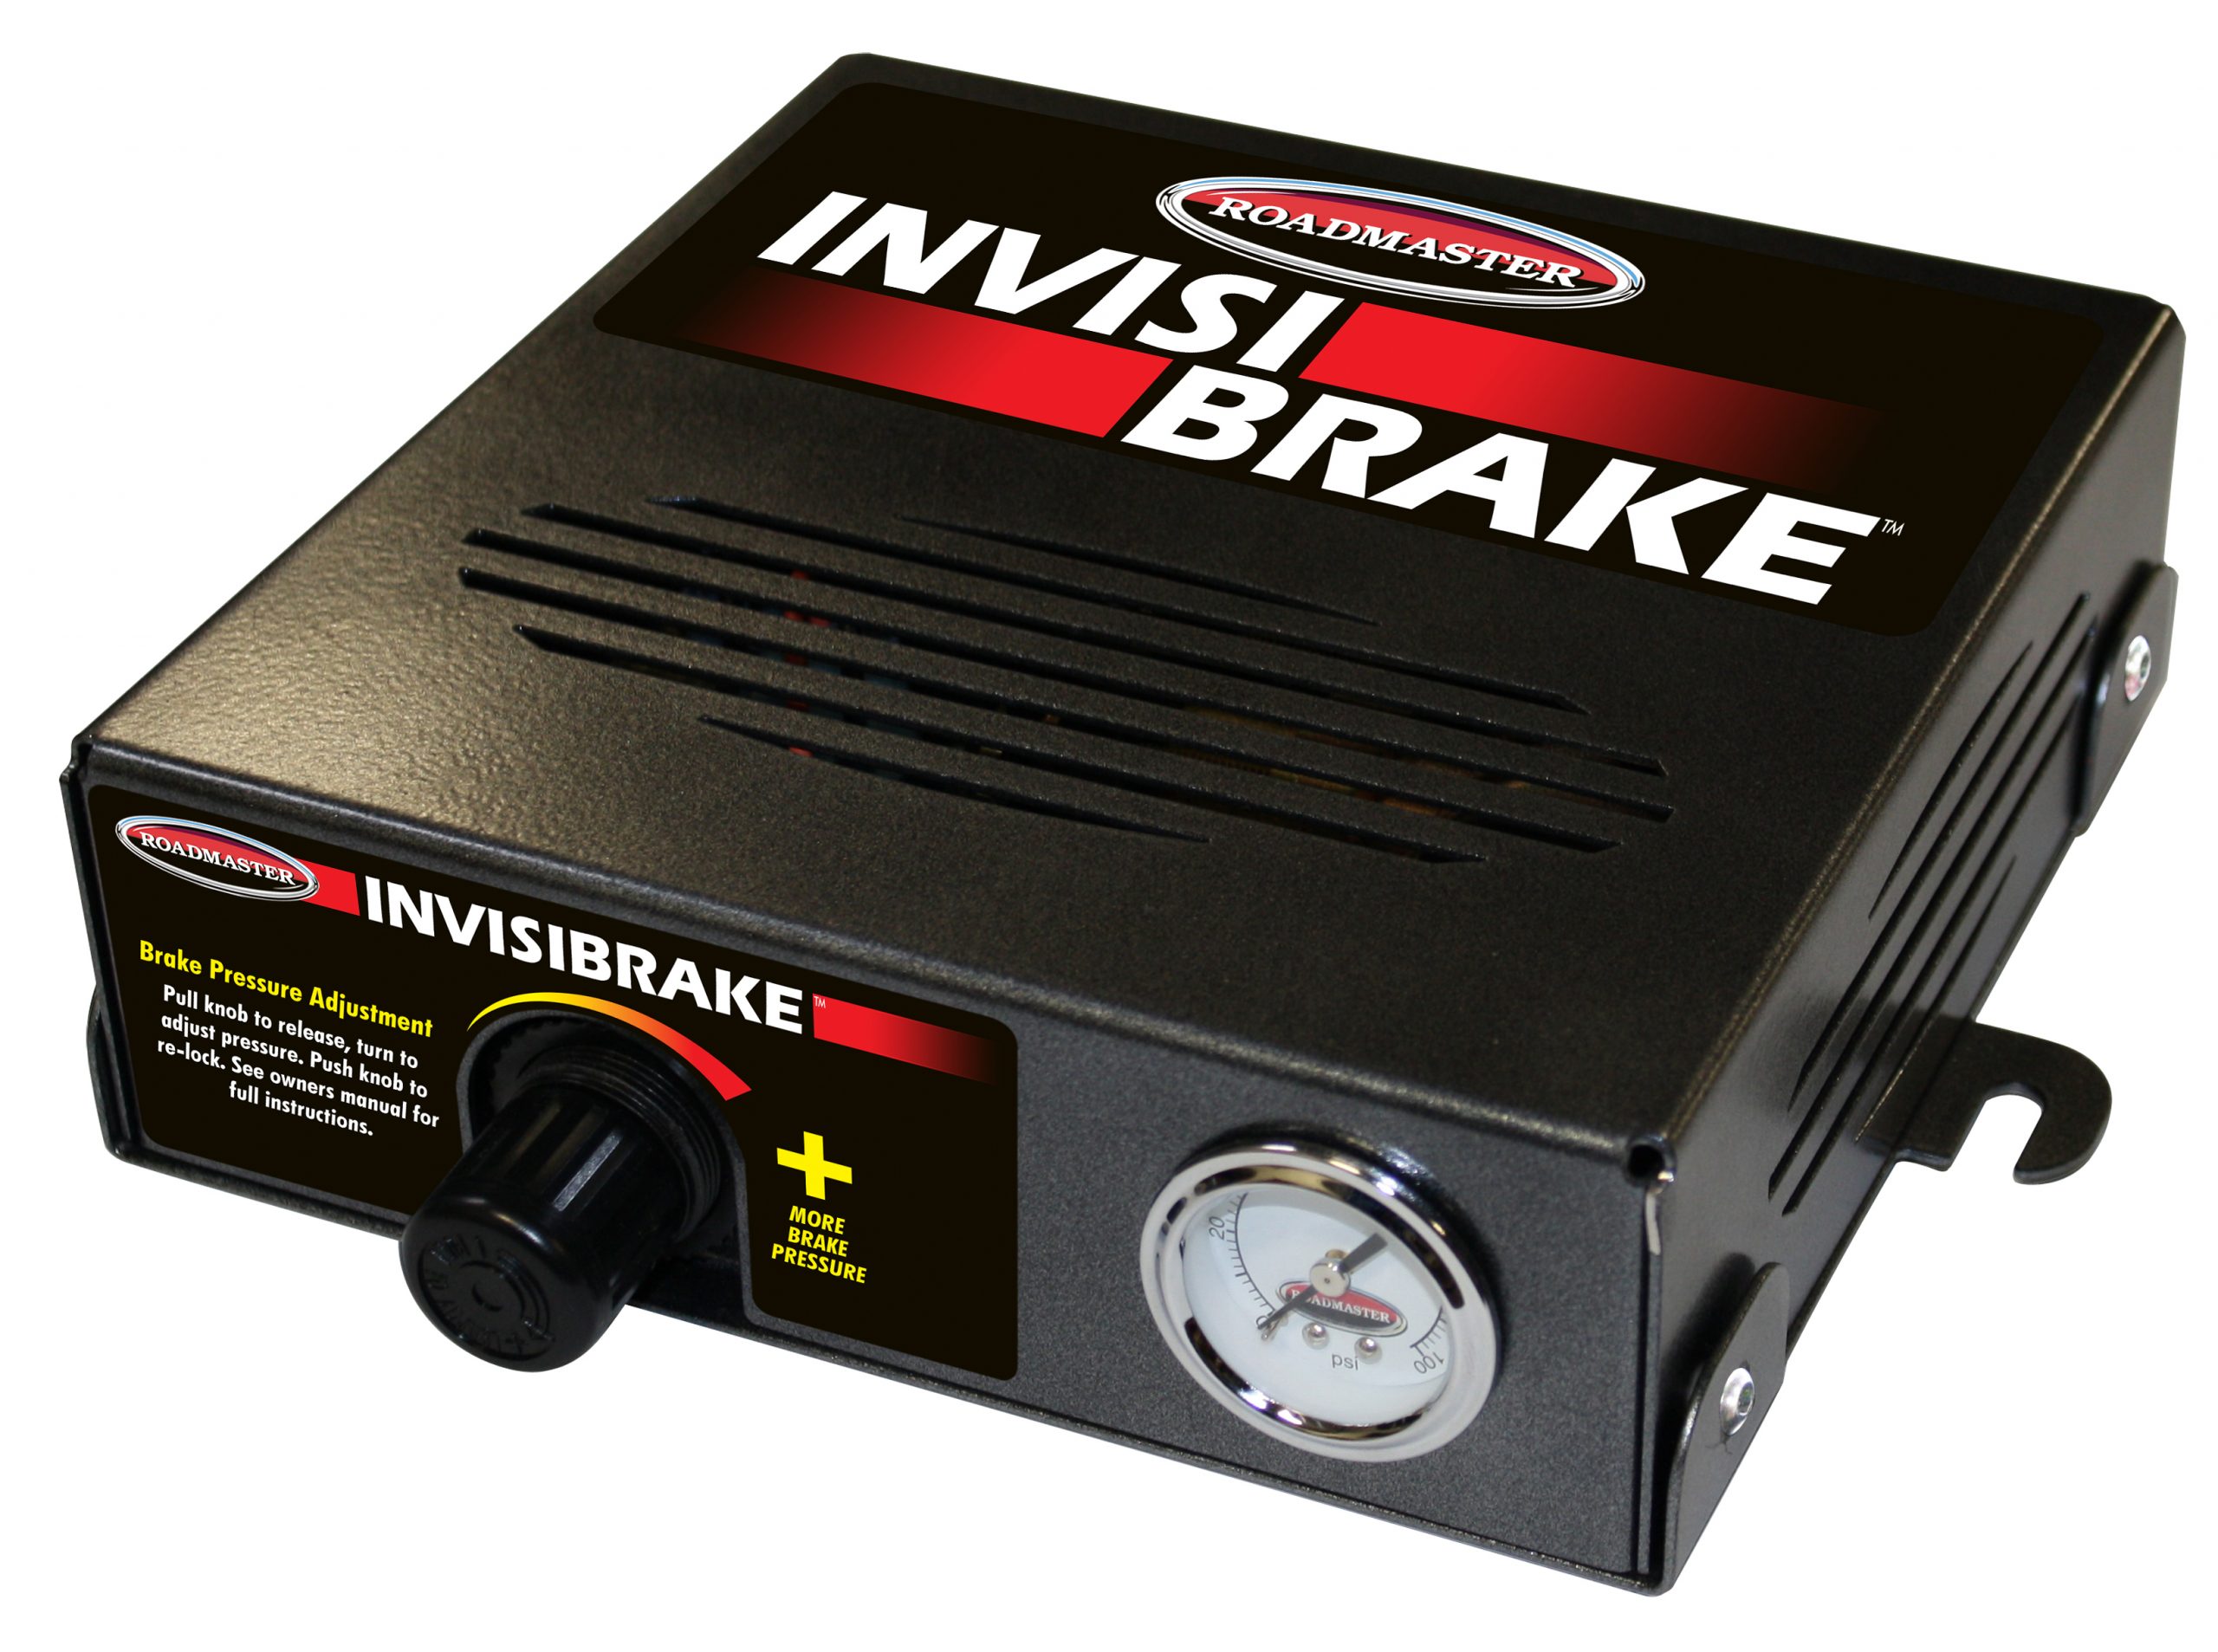 National-Indoor-RV-Centers-blog-supplemental-rv-braking-systems-for-class-a-coach-or-motorhome-roadmaster-invisibrake